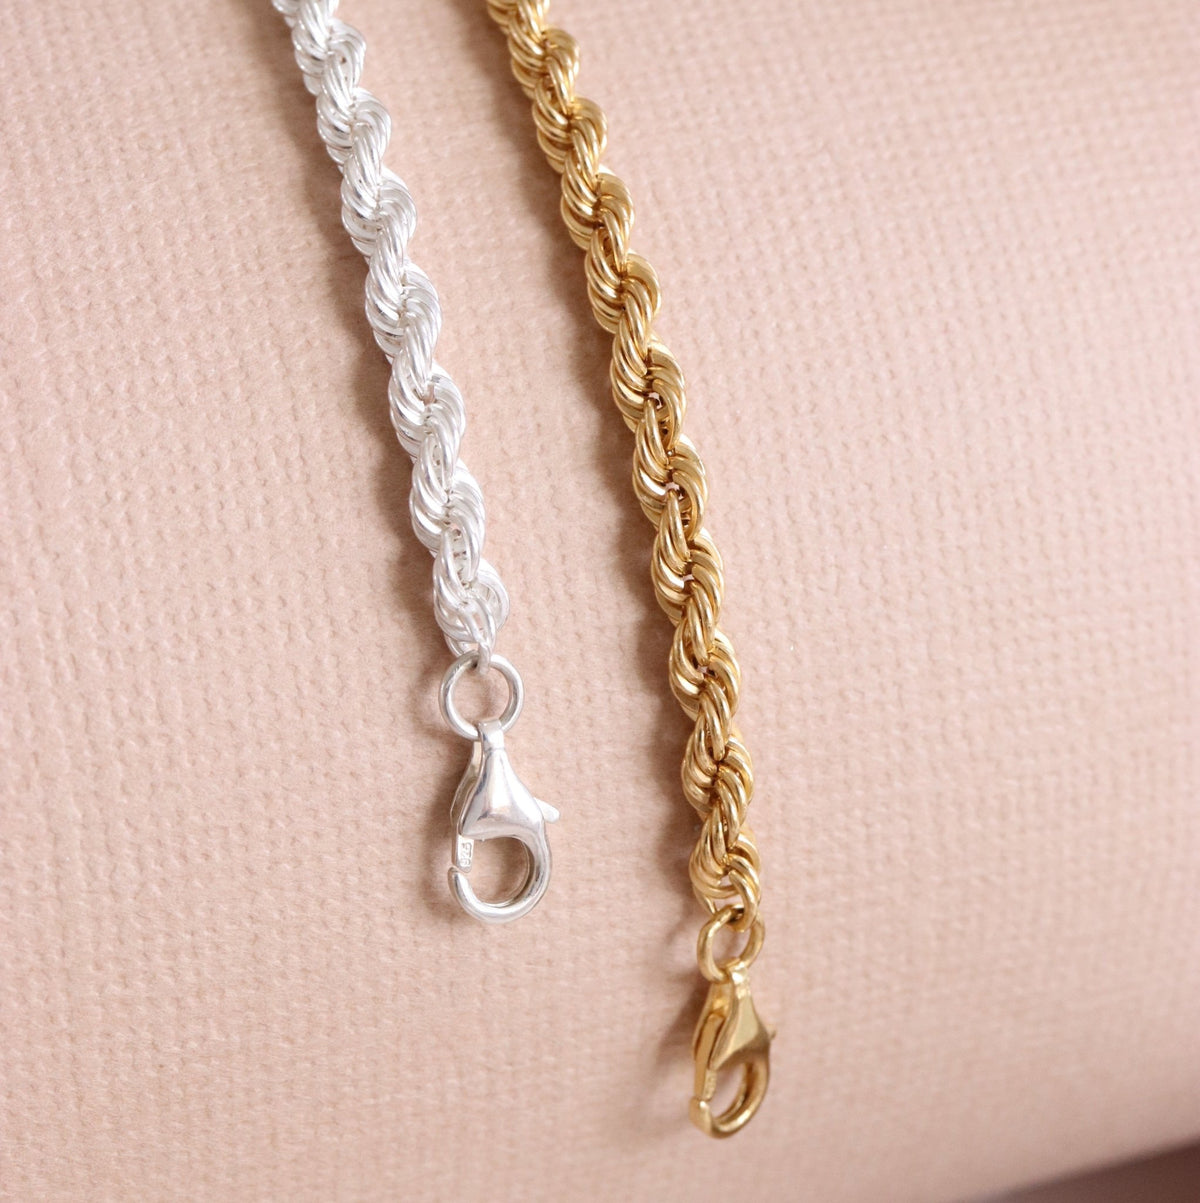 POISE TWISTED ROPE CHAIN BRACELET GOLD - SO PRETTY CARA COTTER